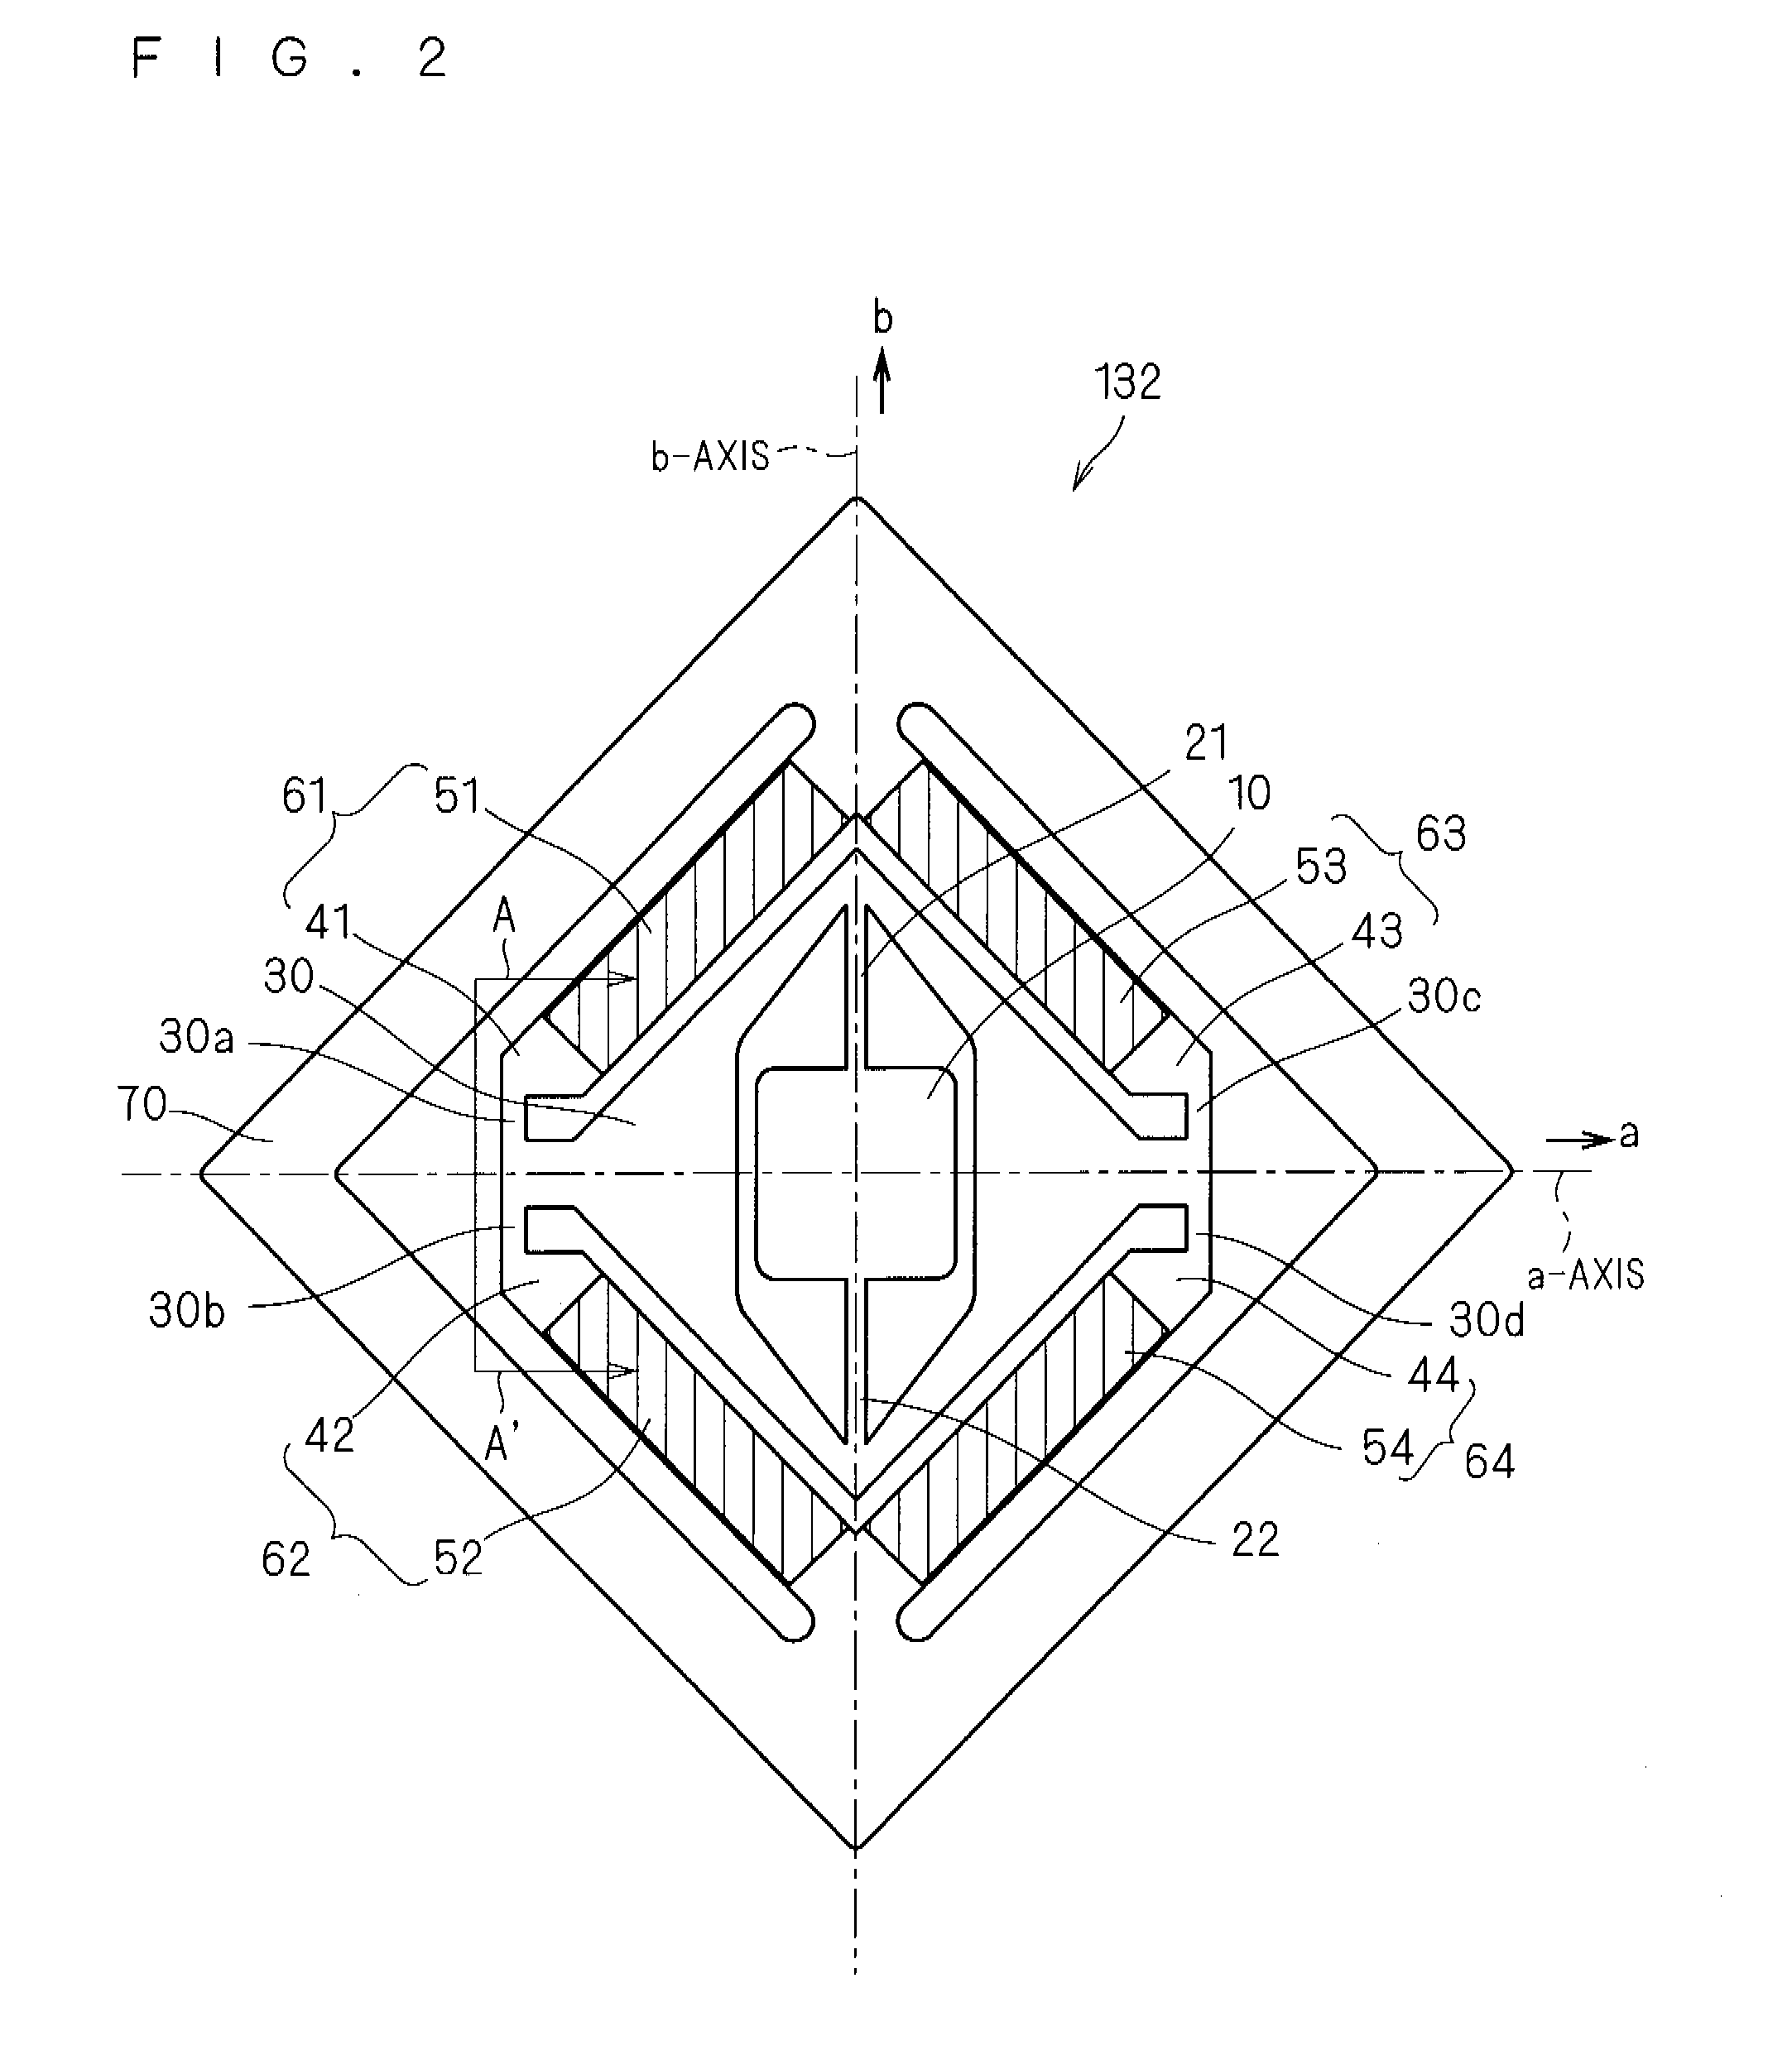 Image projection device